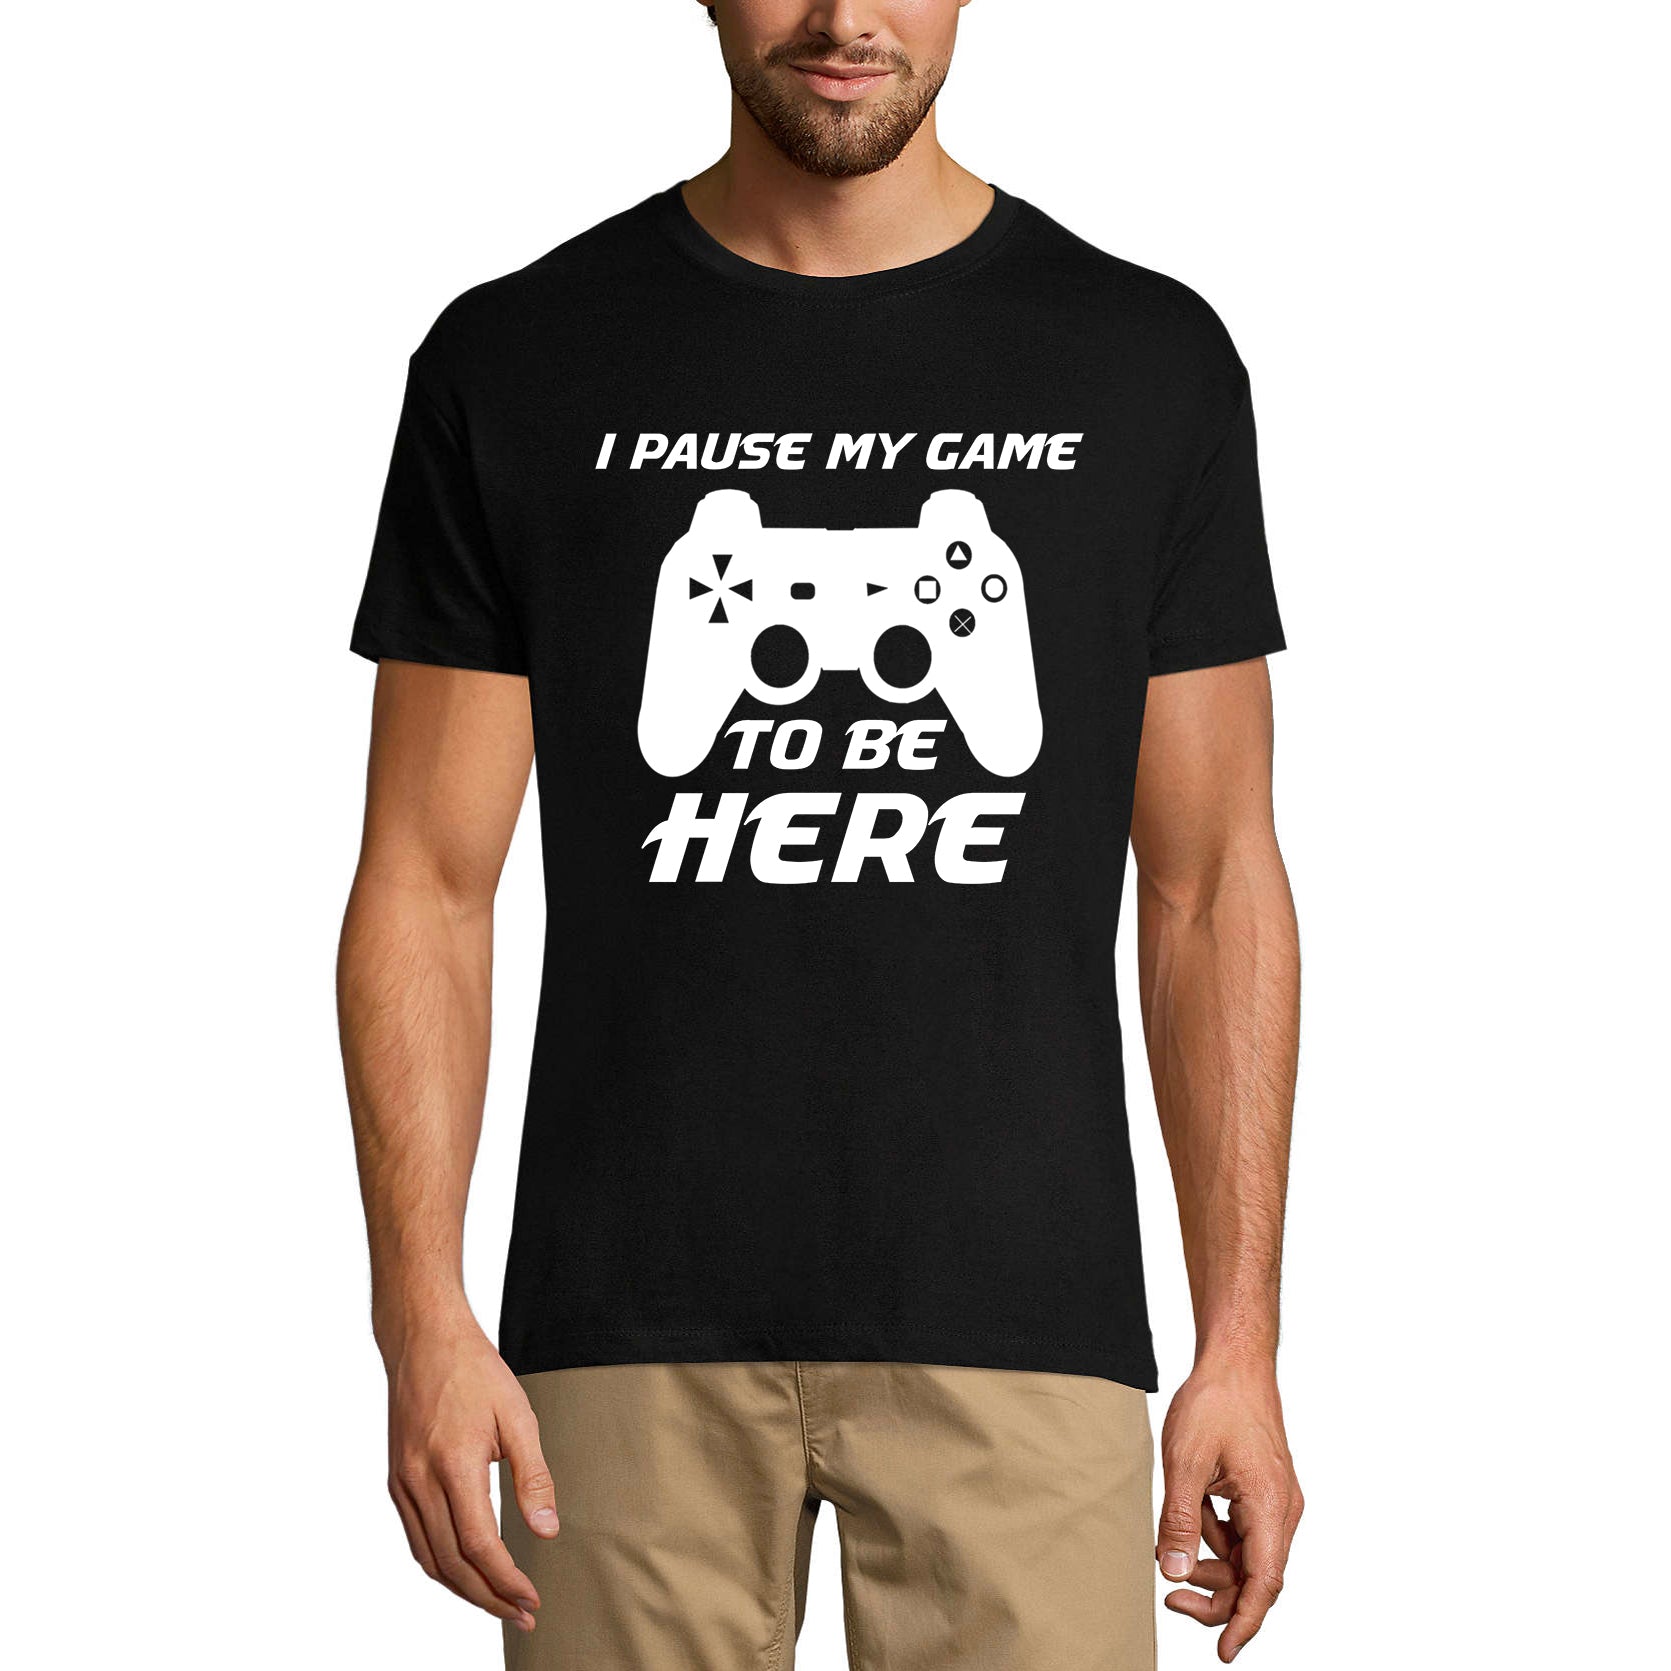 ULTRABASIC Men's T-Shirt I Pause My Game To be Here - Gaming Apparel for Guys mode on level up dad gamer i paused my game alien player ufo playstation tee shirt clothes gaming apparel gifts super mario nintendo call of duty graphic tshirt video game funny geek gift for the gamer fortnite pubg humor son father birthday